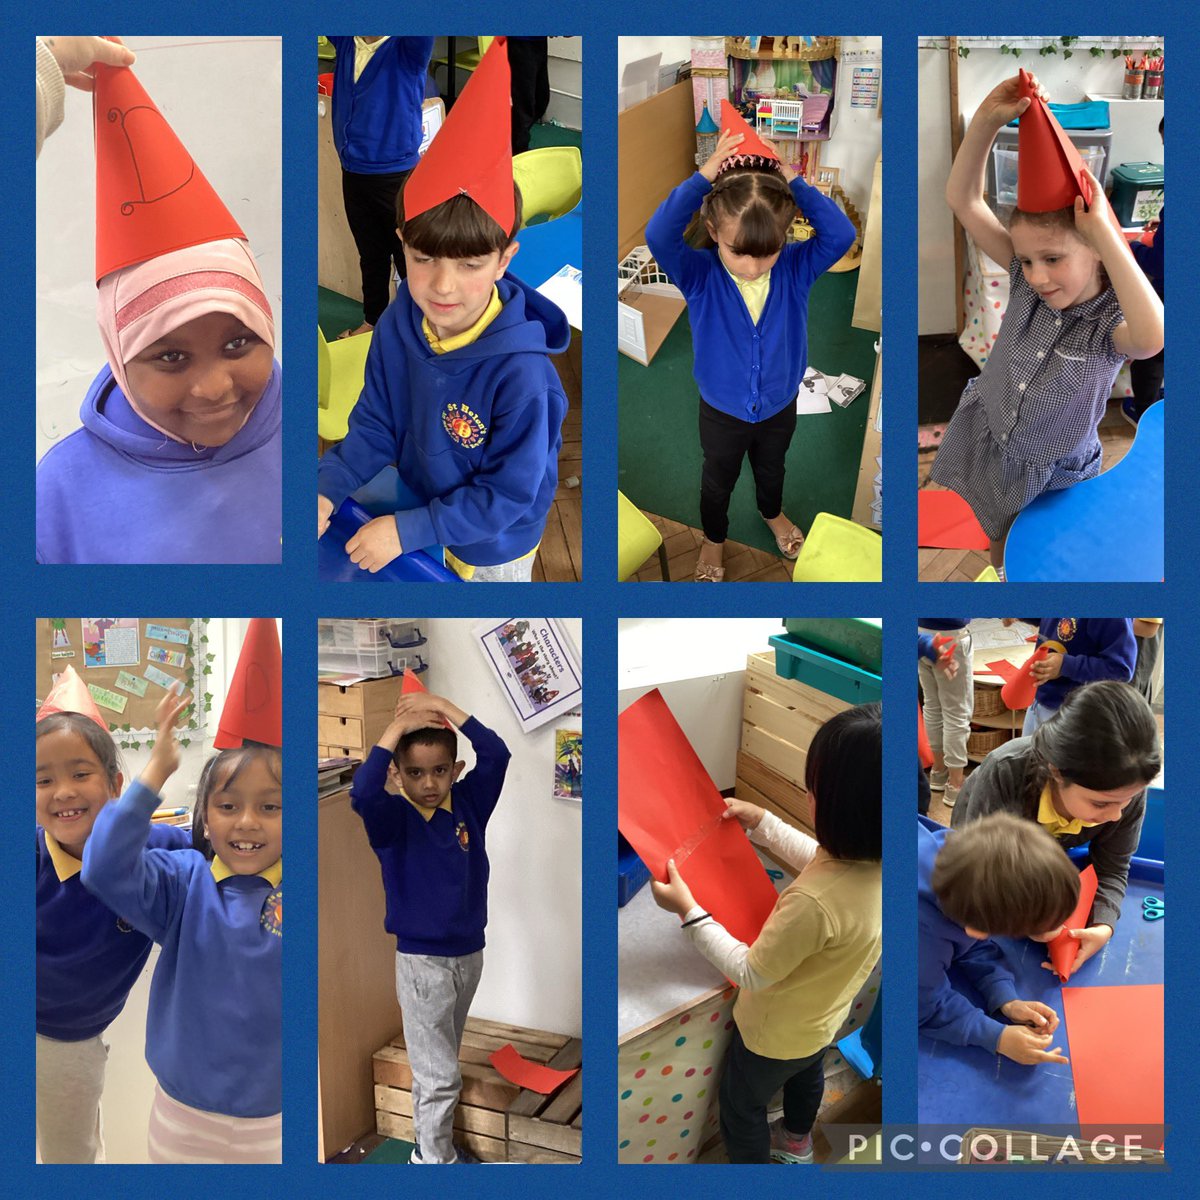 Y2 have been busy making dunce hats independently. #sthphuman #sthpexpart